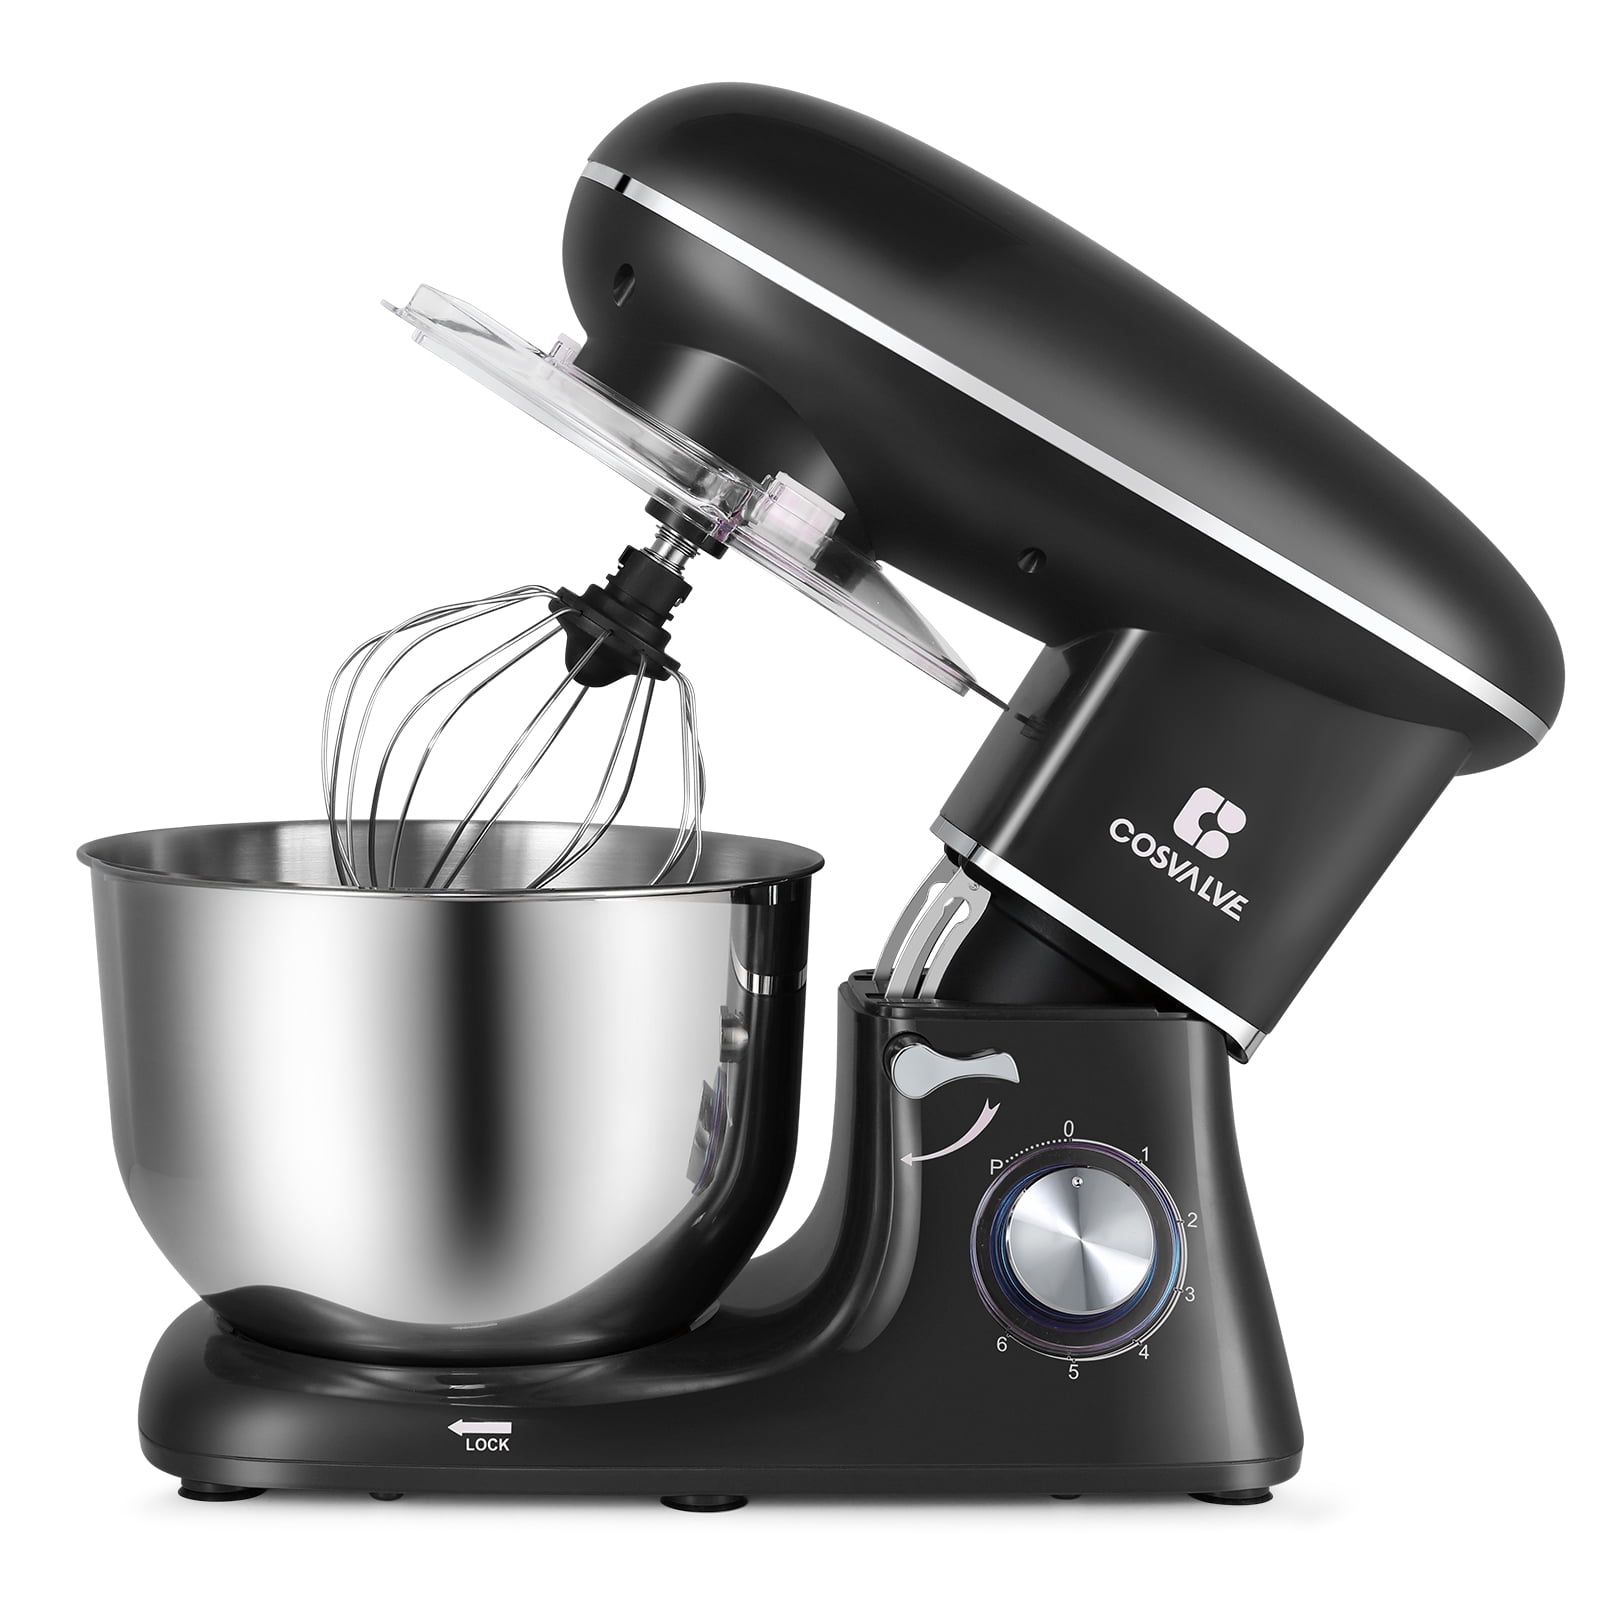 Electric Stand Mixer, 8.5 QT Stand Mixer for Kitchen, 6-Speed Tilt-Head Food Mixer, Electric Standing Mixer with Dough Hook Wire Whip Beater, Professional Cake Mixer Machine, Black, A5006 - Walmart.com